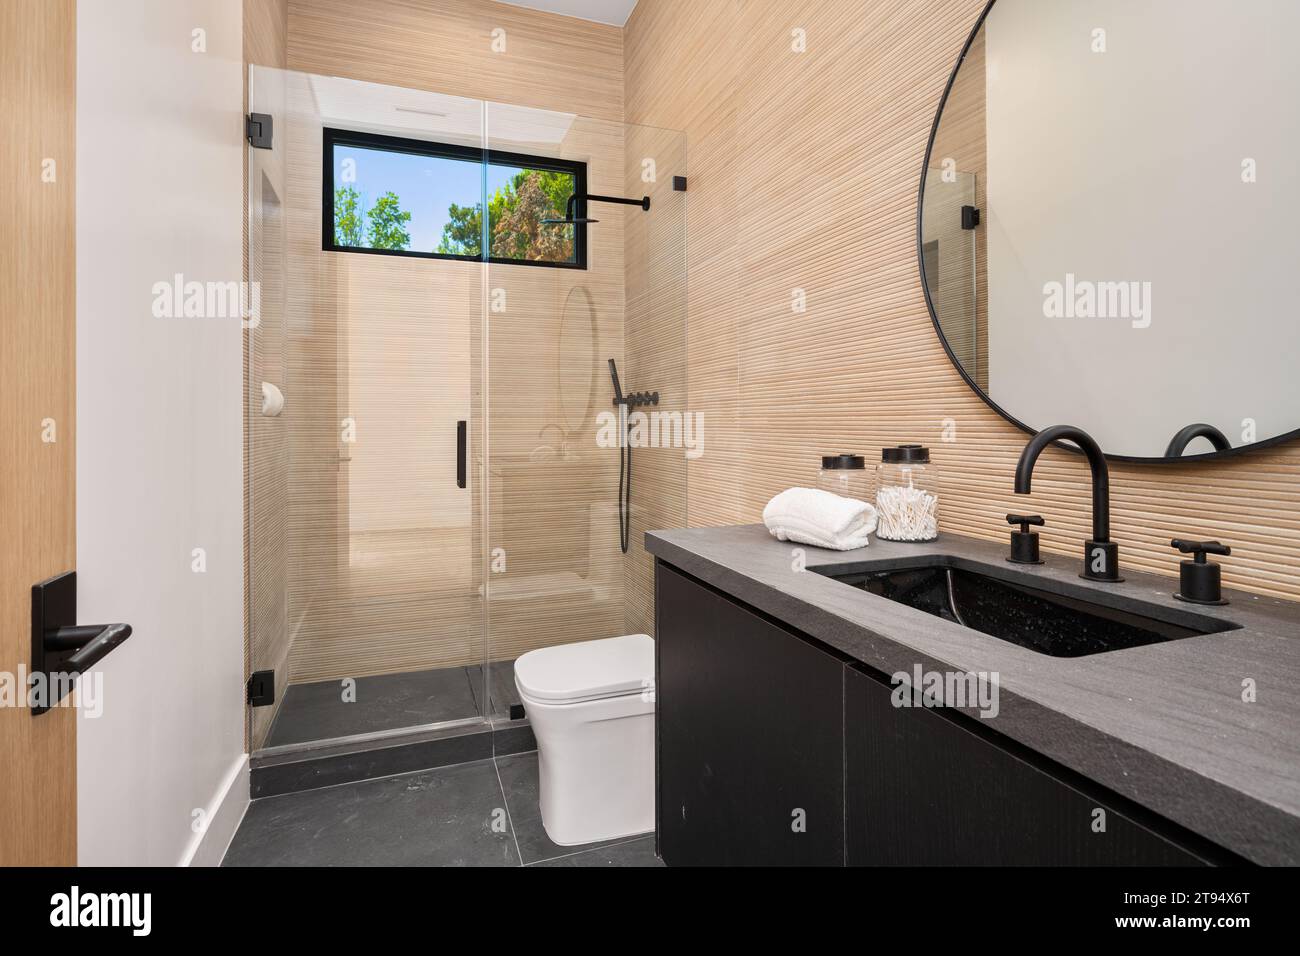 This bright and airy bathroom is ready to be used and enjoyed, featuring a modern shower and pristinely clean surfaces Stock Photo